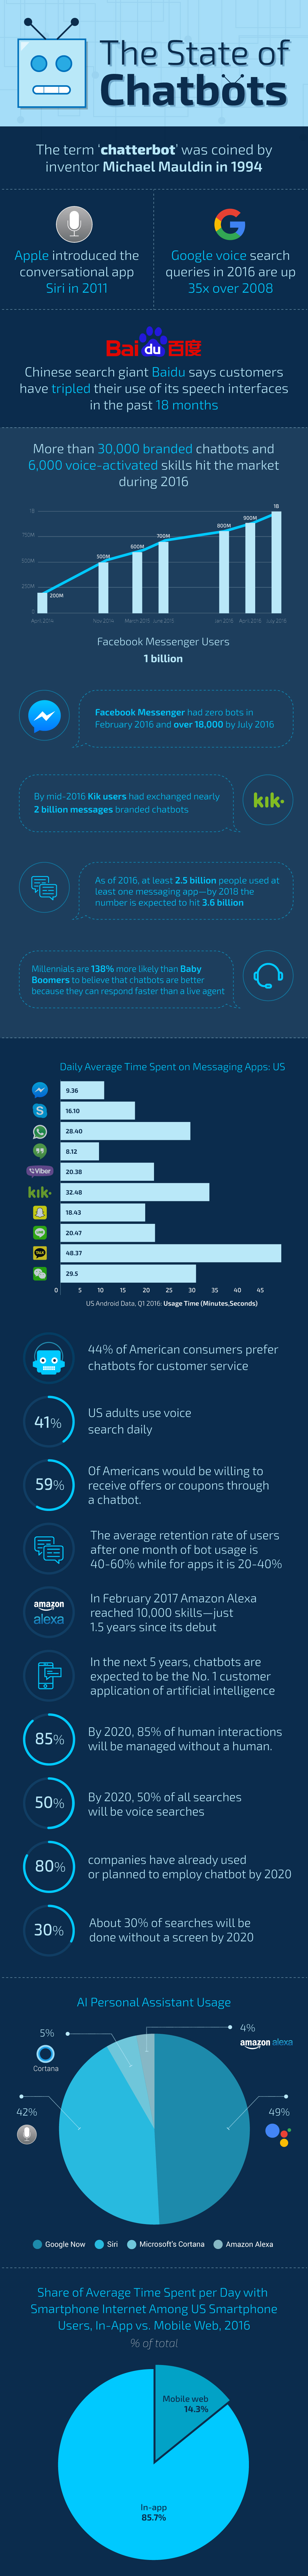 Infographic: The State of Chatbots